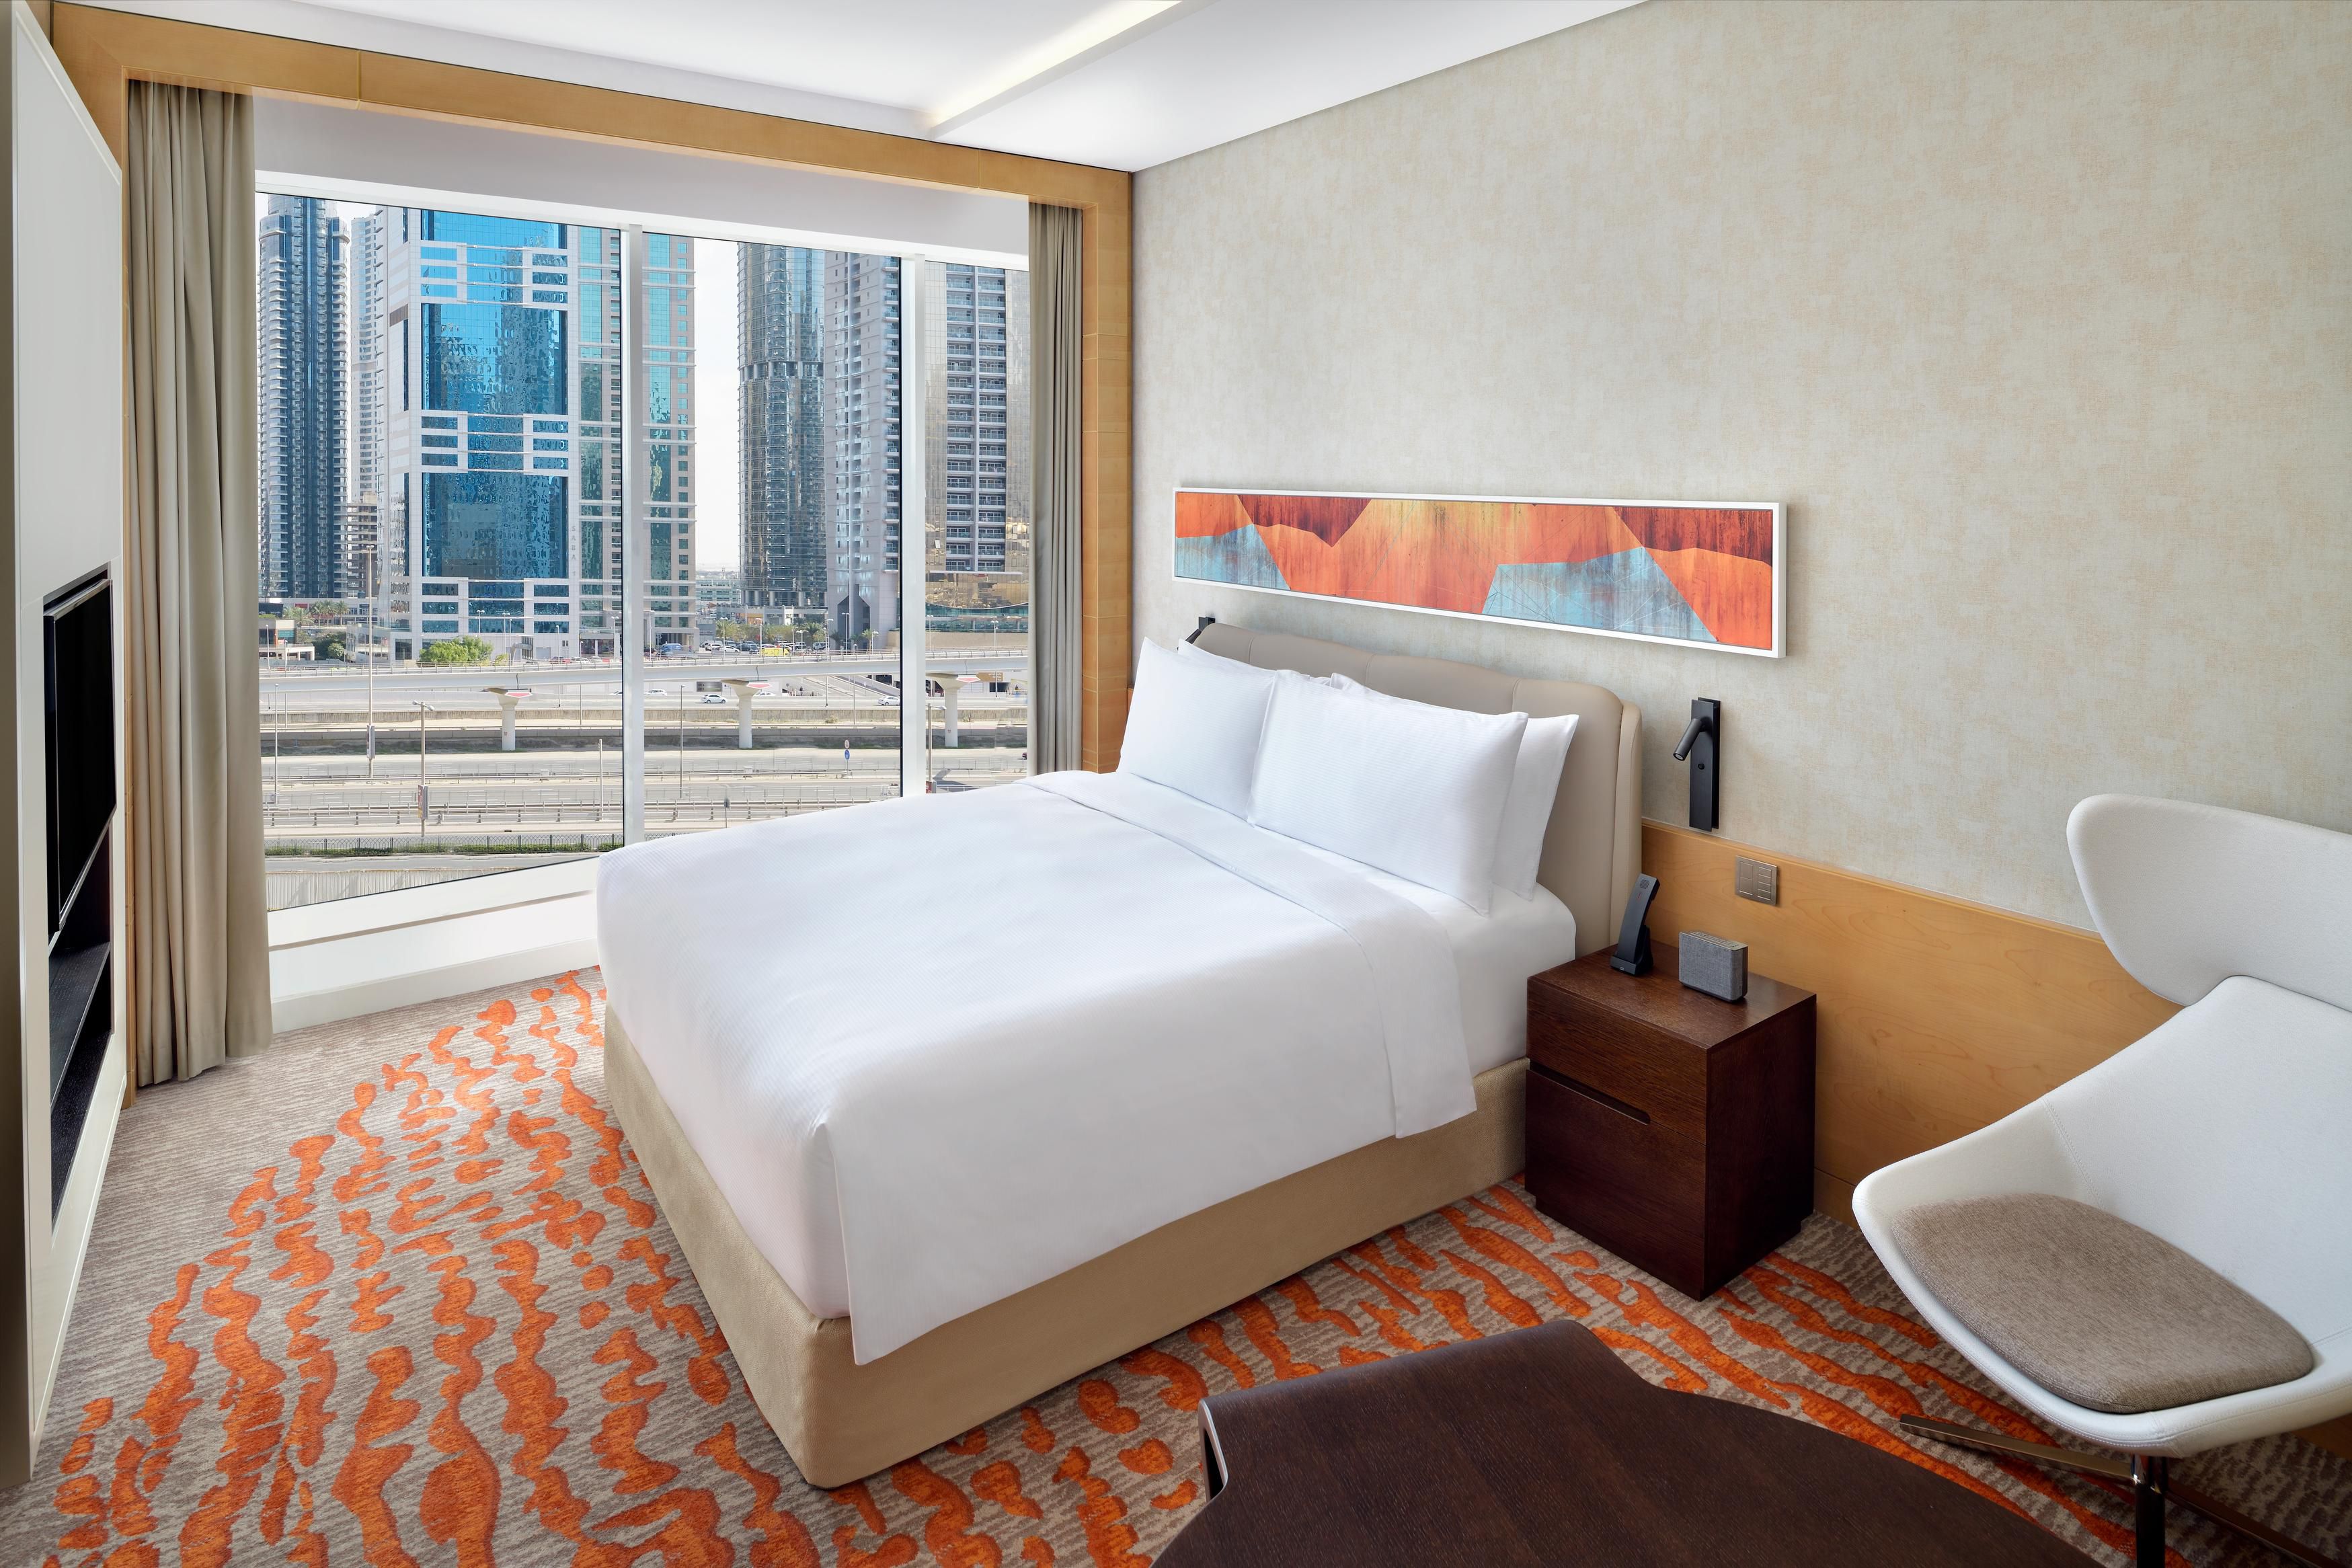 King Bed Guest Room with City View on Sh Zayed Road and JLT